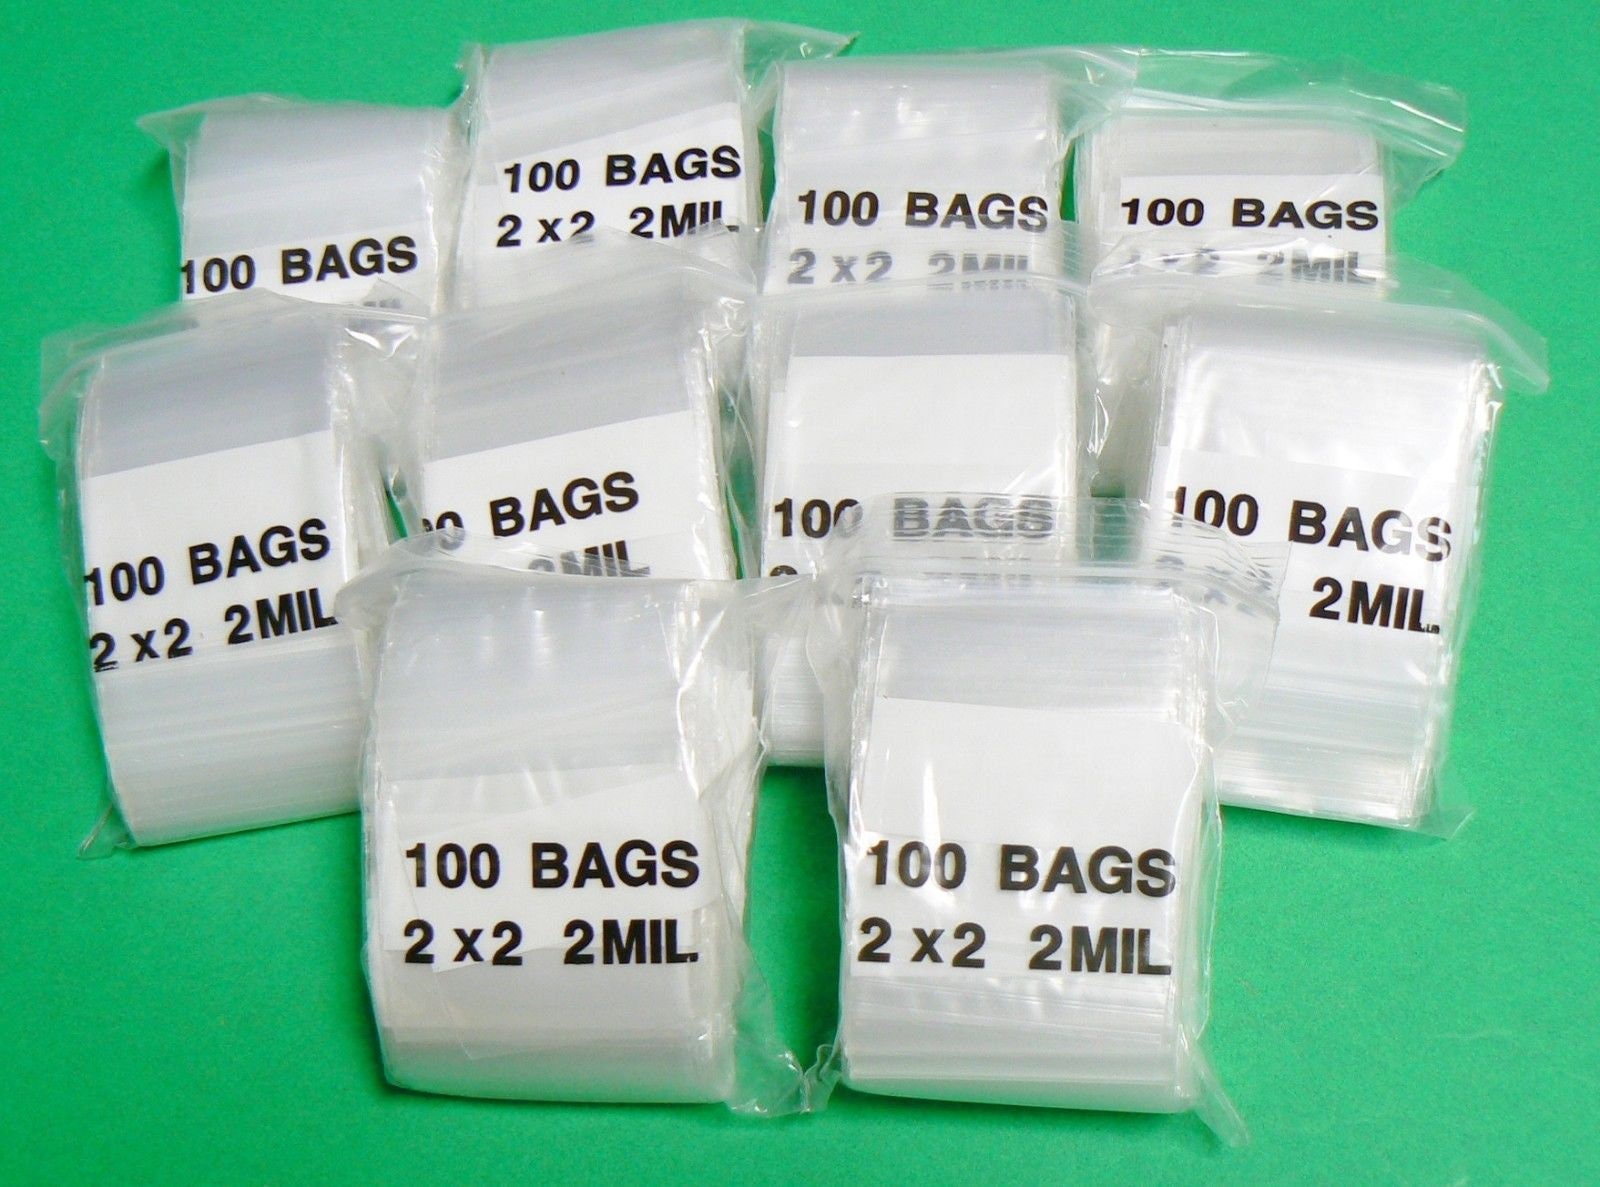 White Block Plastic Zip Bags, 2MIL Thickness, Reclosable Top Lock, Small  Large Mini Baggies for Jewelry, Beads, Rings, Coins, Any Quantity